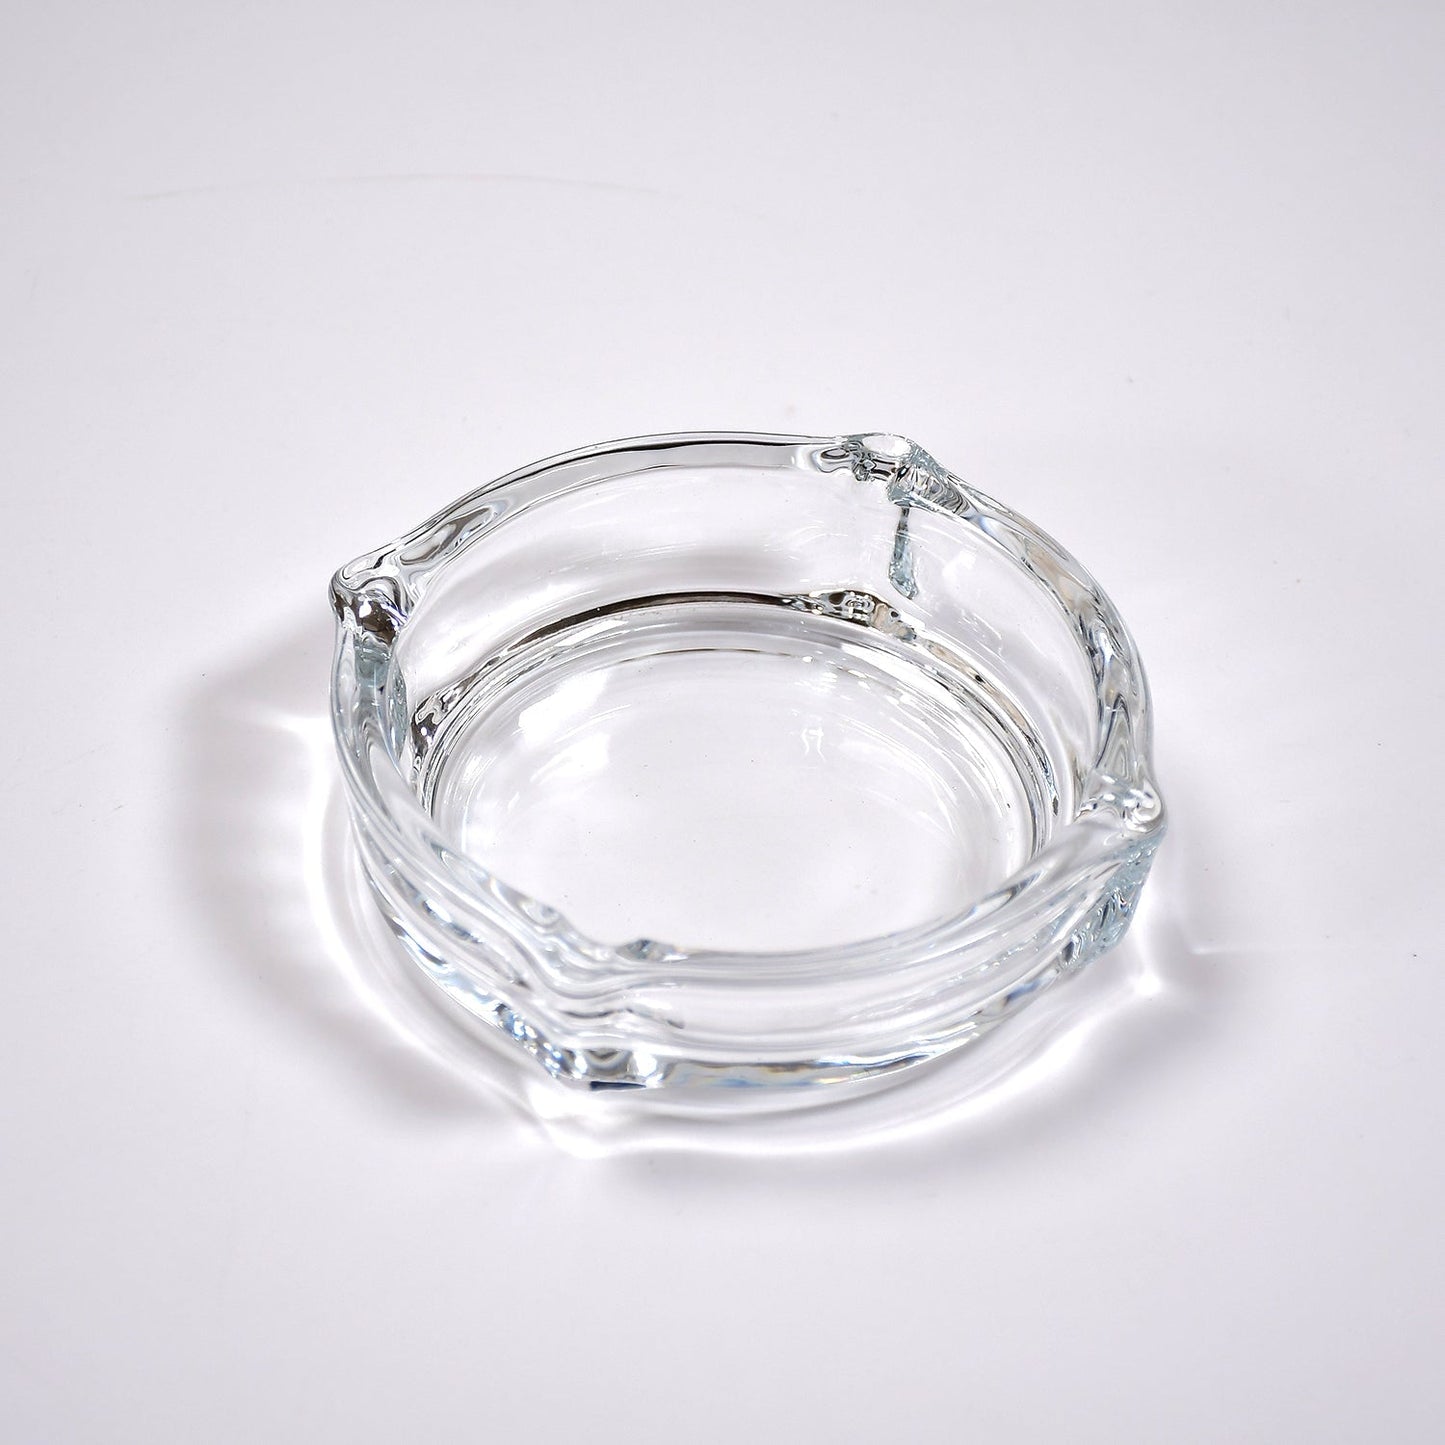 Glass Brunswick Crystal Quality Cigar Cigarette Ashtray Round Tabletop for Home Decor